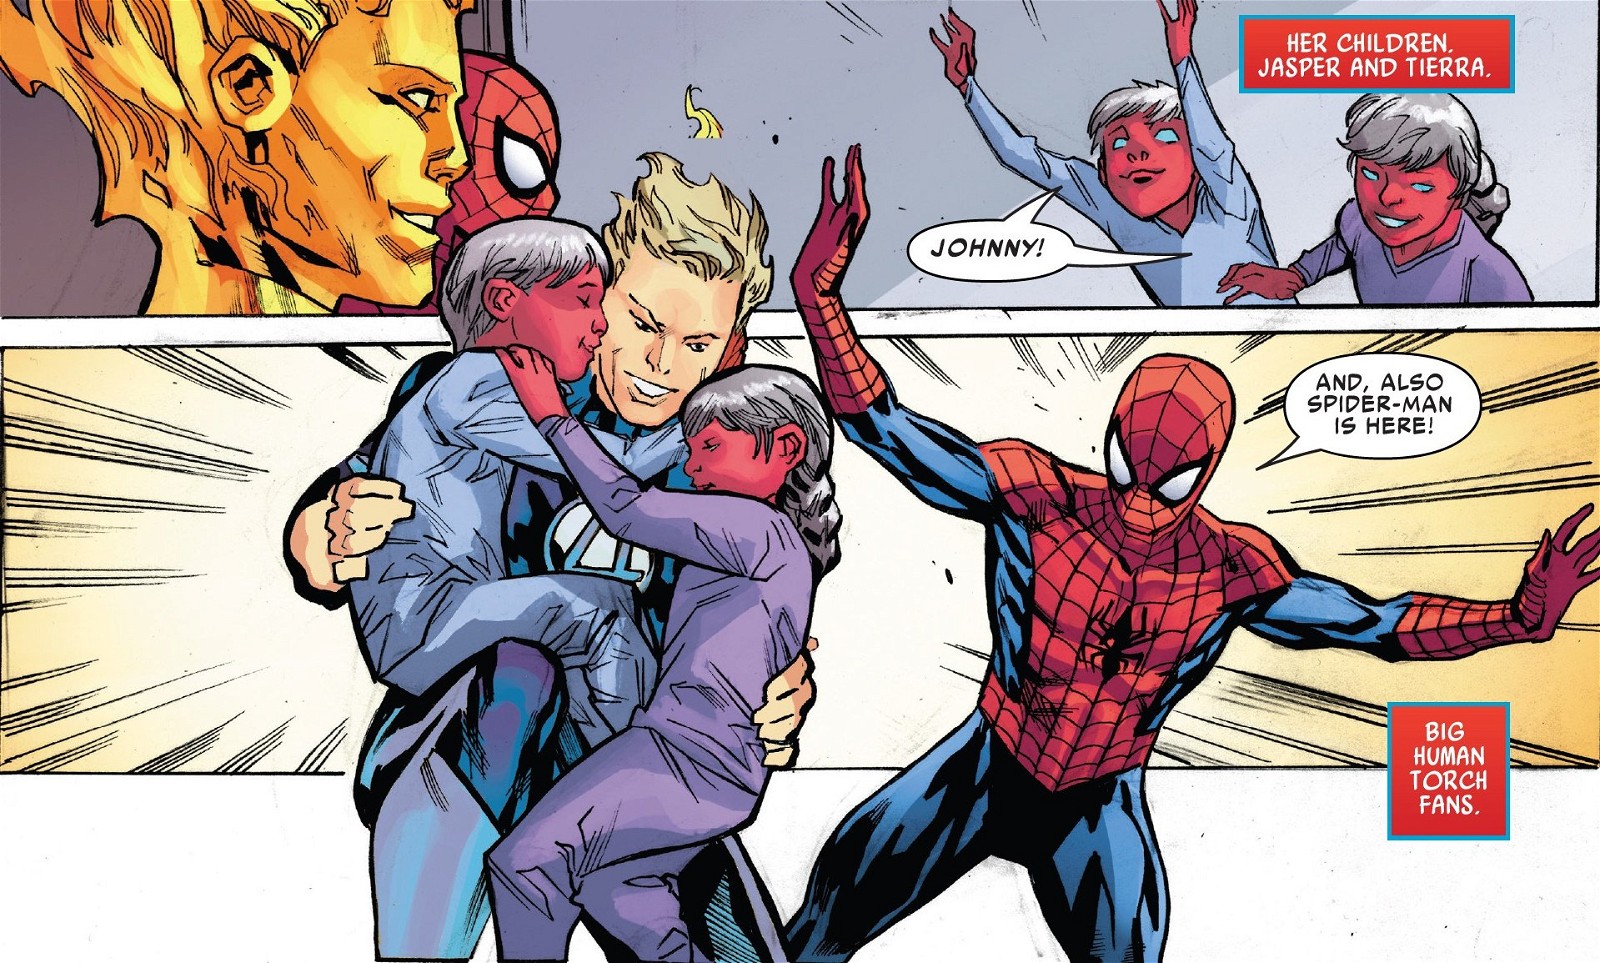 Spider-Man and Johnny Storm save the day